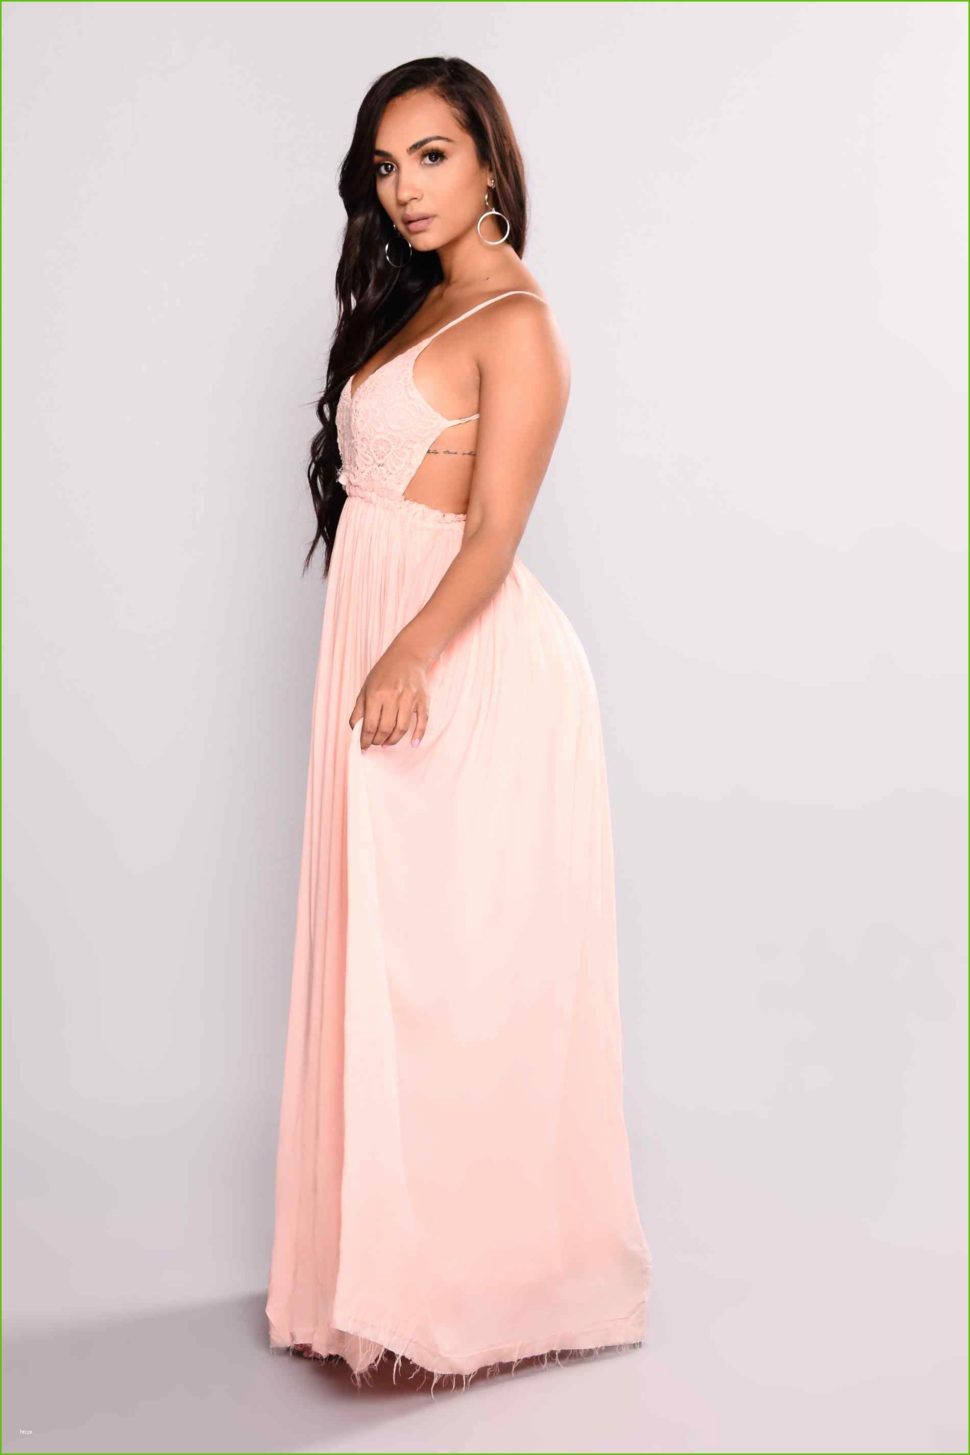 Medium Size of Baby Shower:sturdy Stylish Maternity Dresses For Baby Shower Picture Ideas Stylish Maternity Dresses For Baby Shower As Well As Mesa Baby Shower With Baby Shower Table Ideas Plus Baby Shower Wishes Together With Baby Shower Party Favors